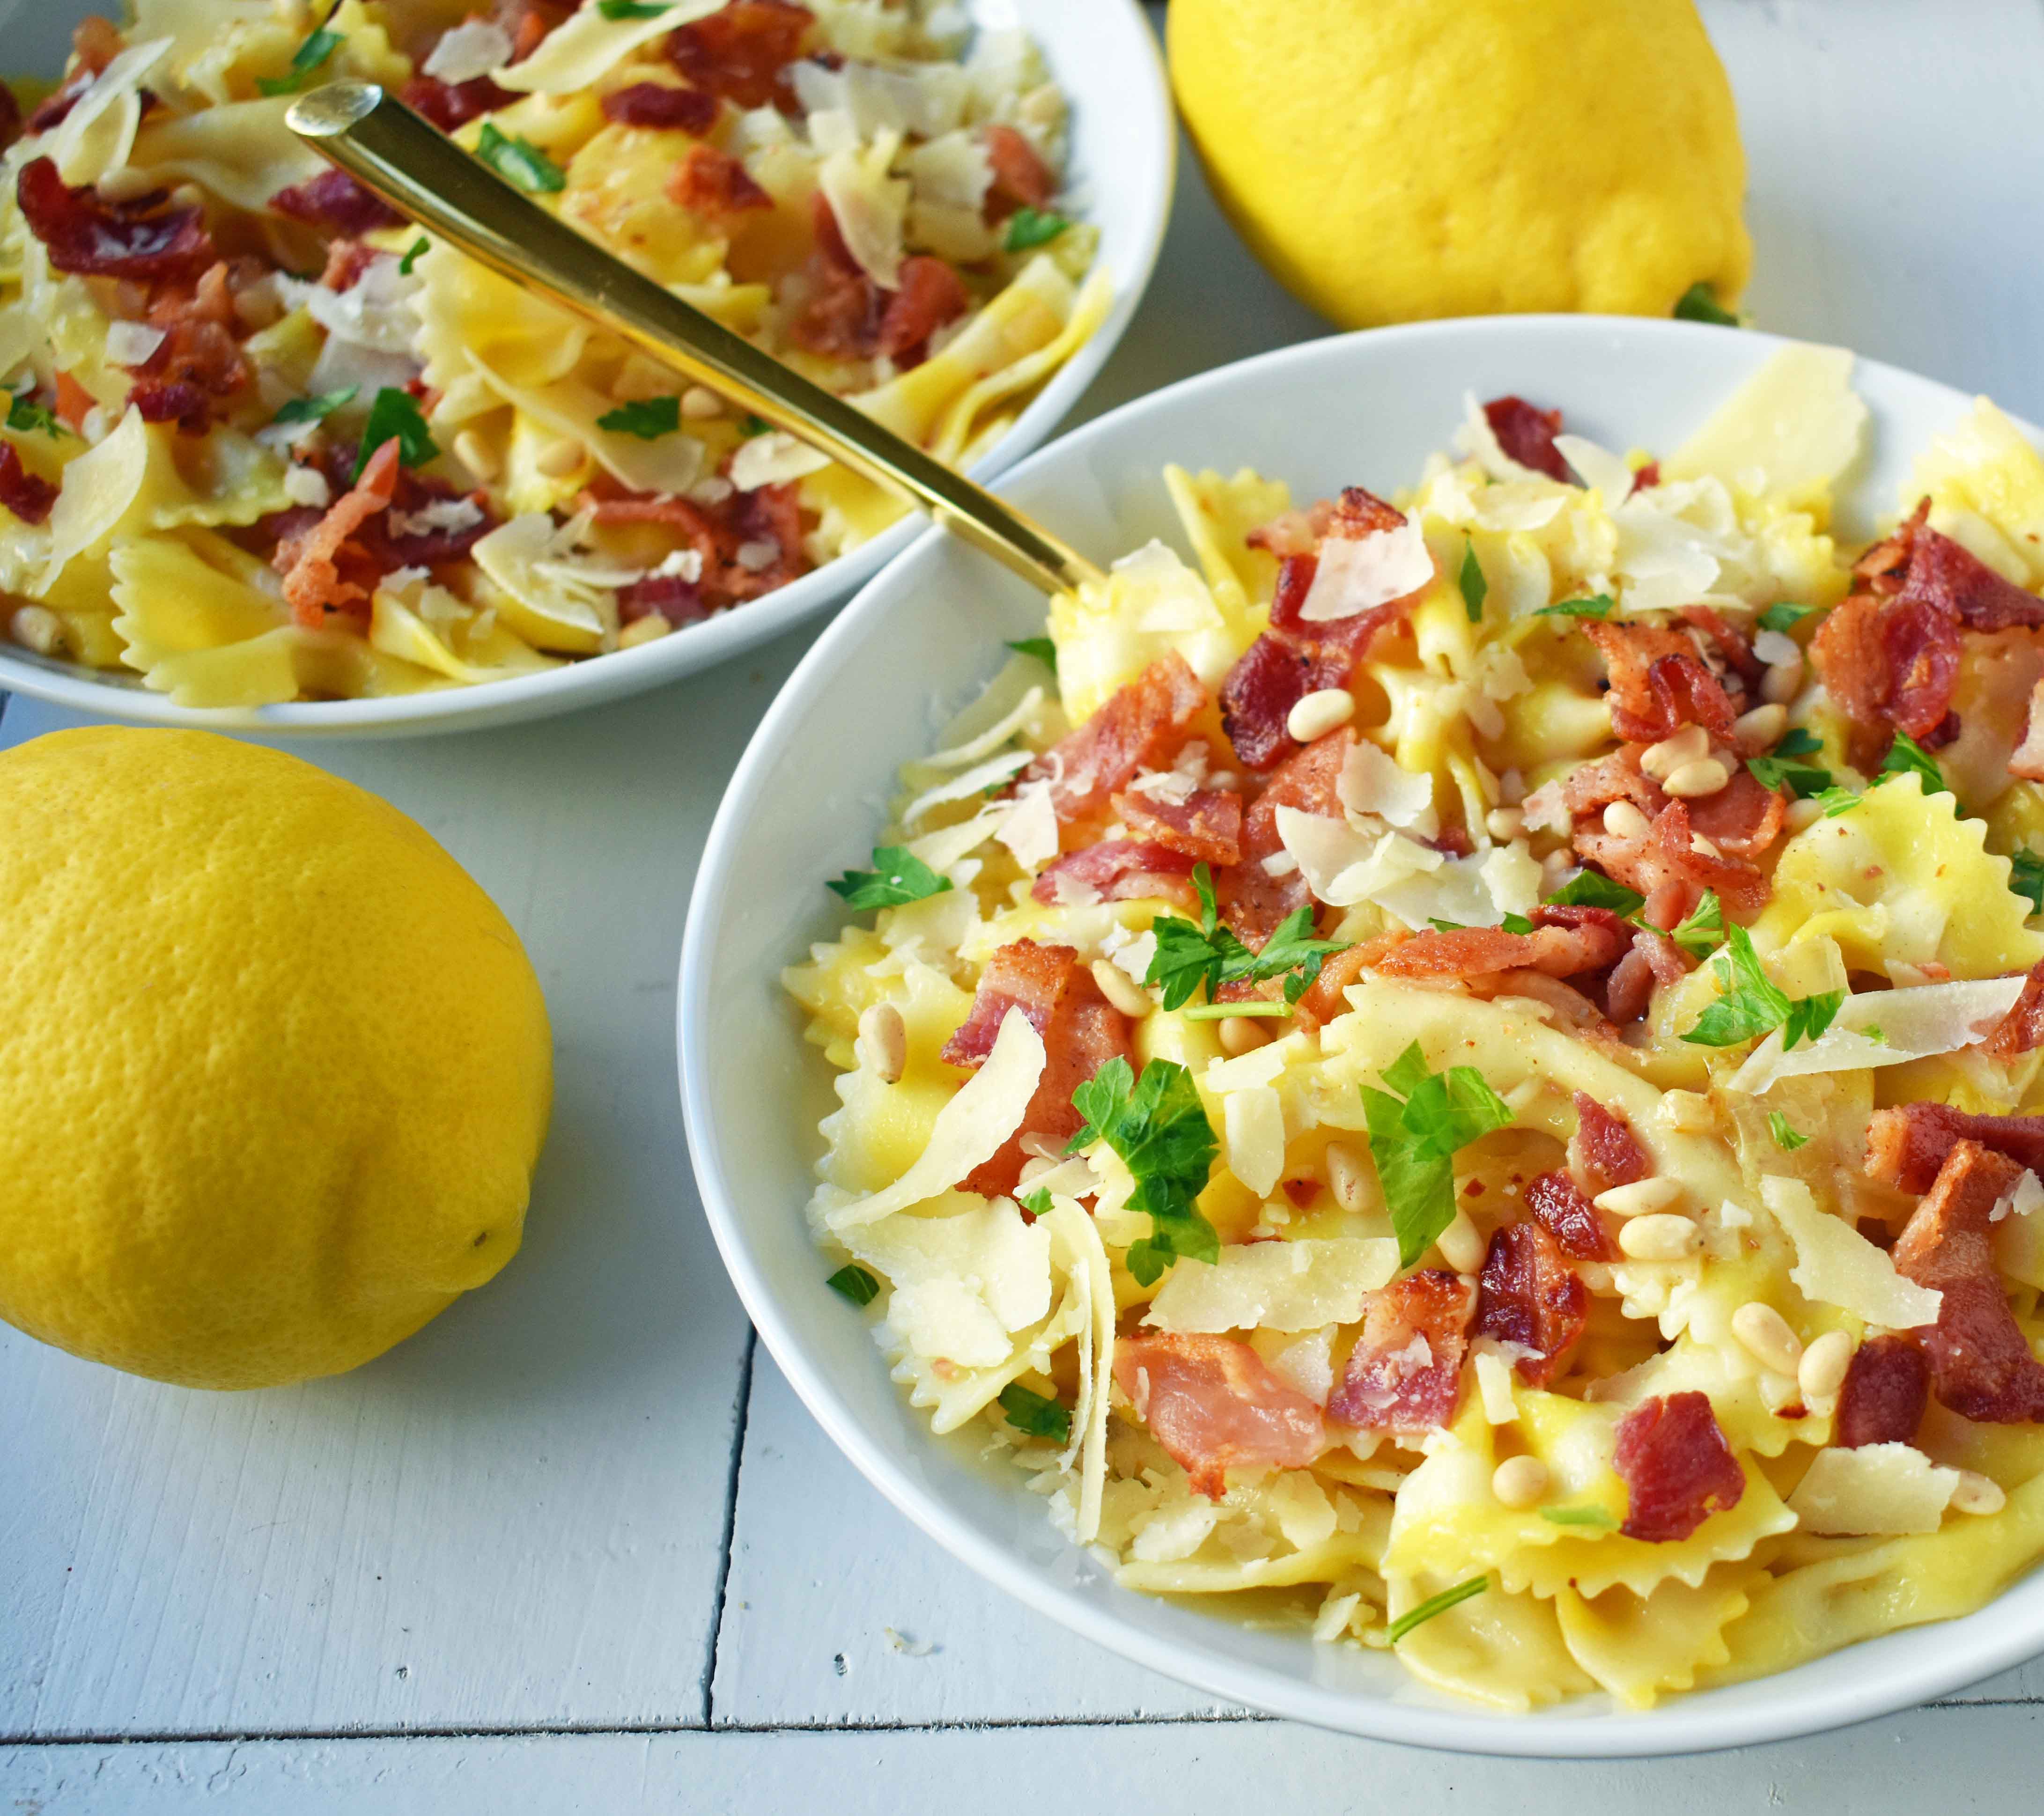 Lemon Garlic and Crispy Bacon Pasta. Farfalle, bowtie pasta, with butter, caramelized onions, and garlic all topped with crispy bacon, parmesan cheese, and pine nuts. A light and fresh pasta with lemon butter and bacon. www.modernhoney.com